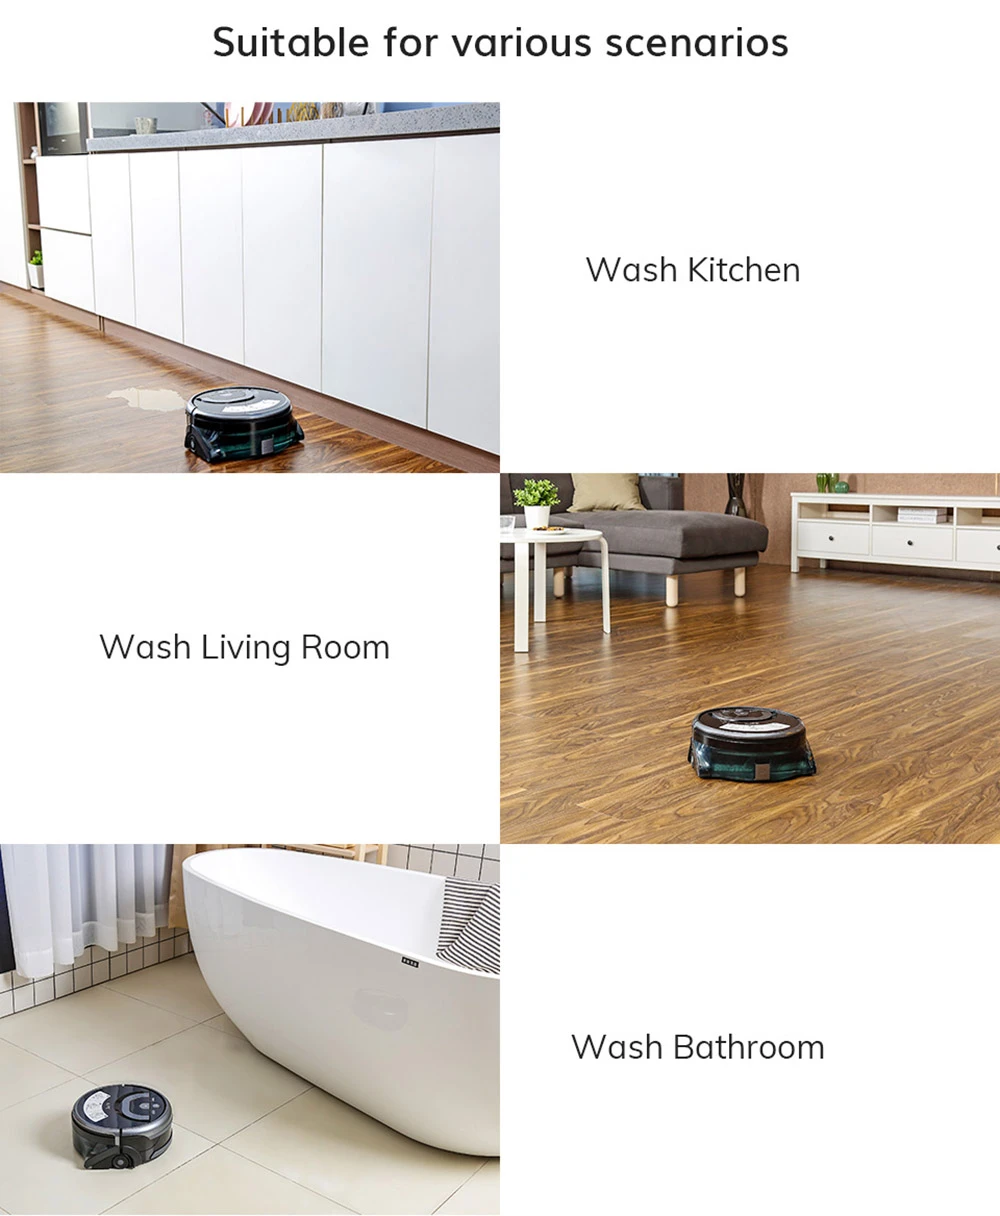 ILIFE W400 1000Pa Floor Washing Robot, 900ml Water Tank, Gyroscopic Planning, 4 Cleaning Mode, Voice Broadcast - US Plug